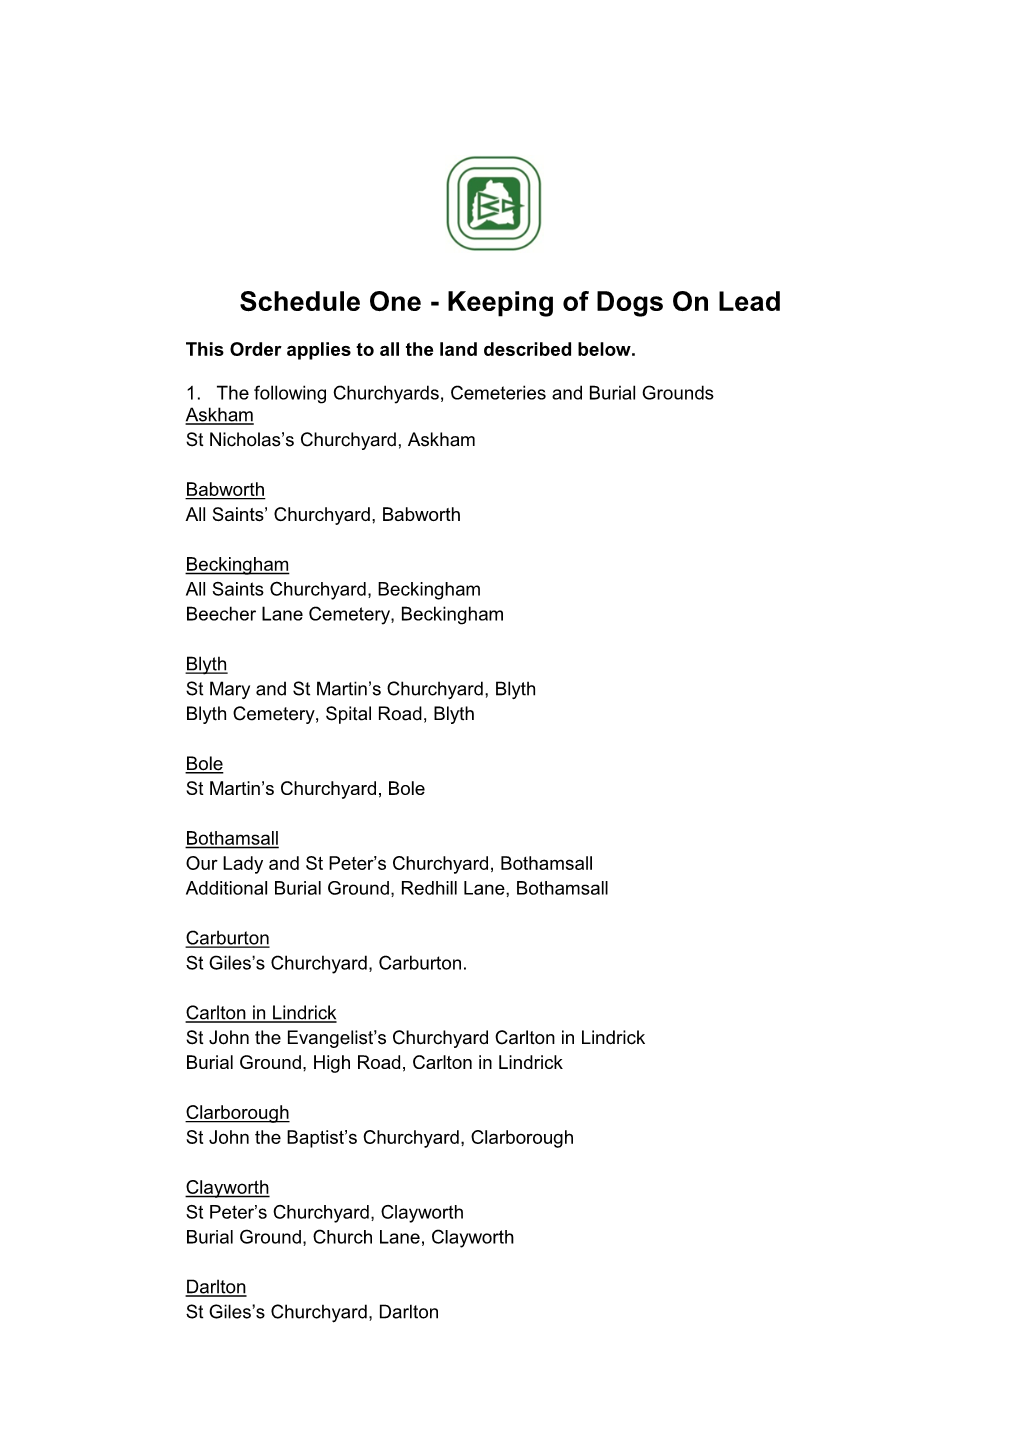 Schedule One - Keeping of Dogs on Lead